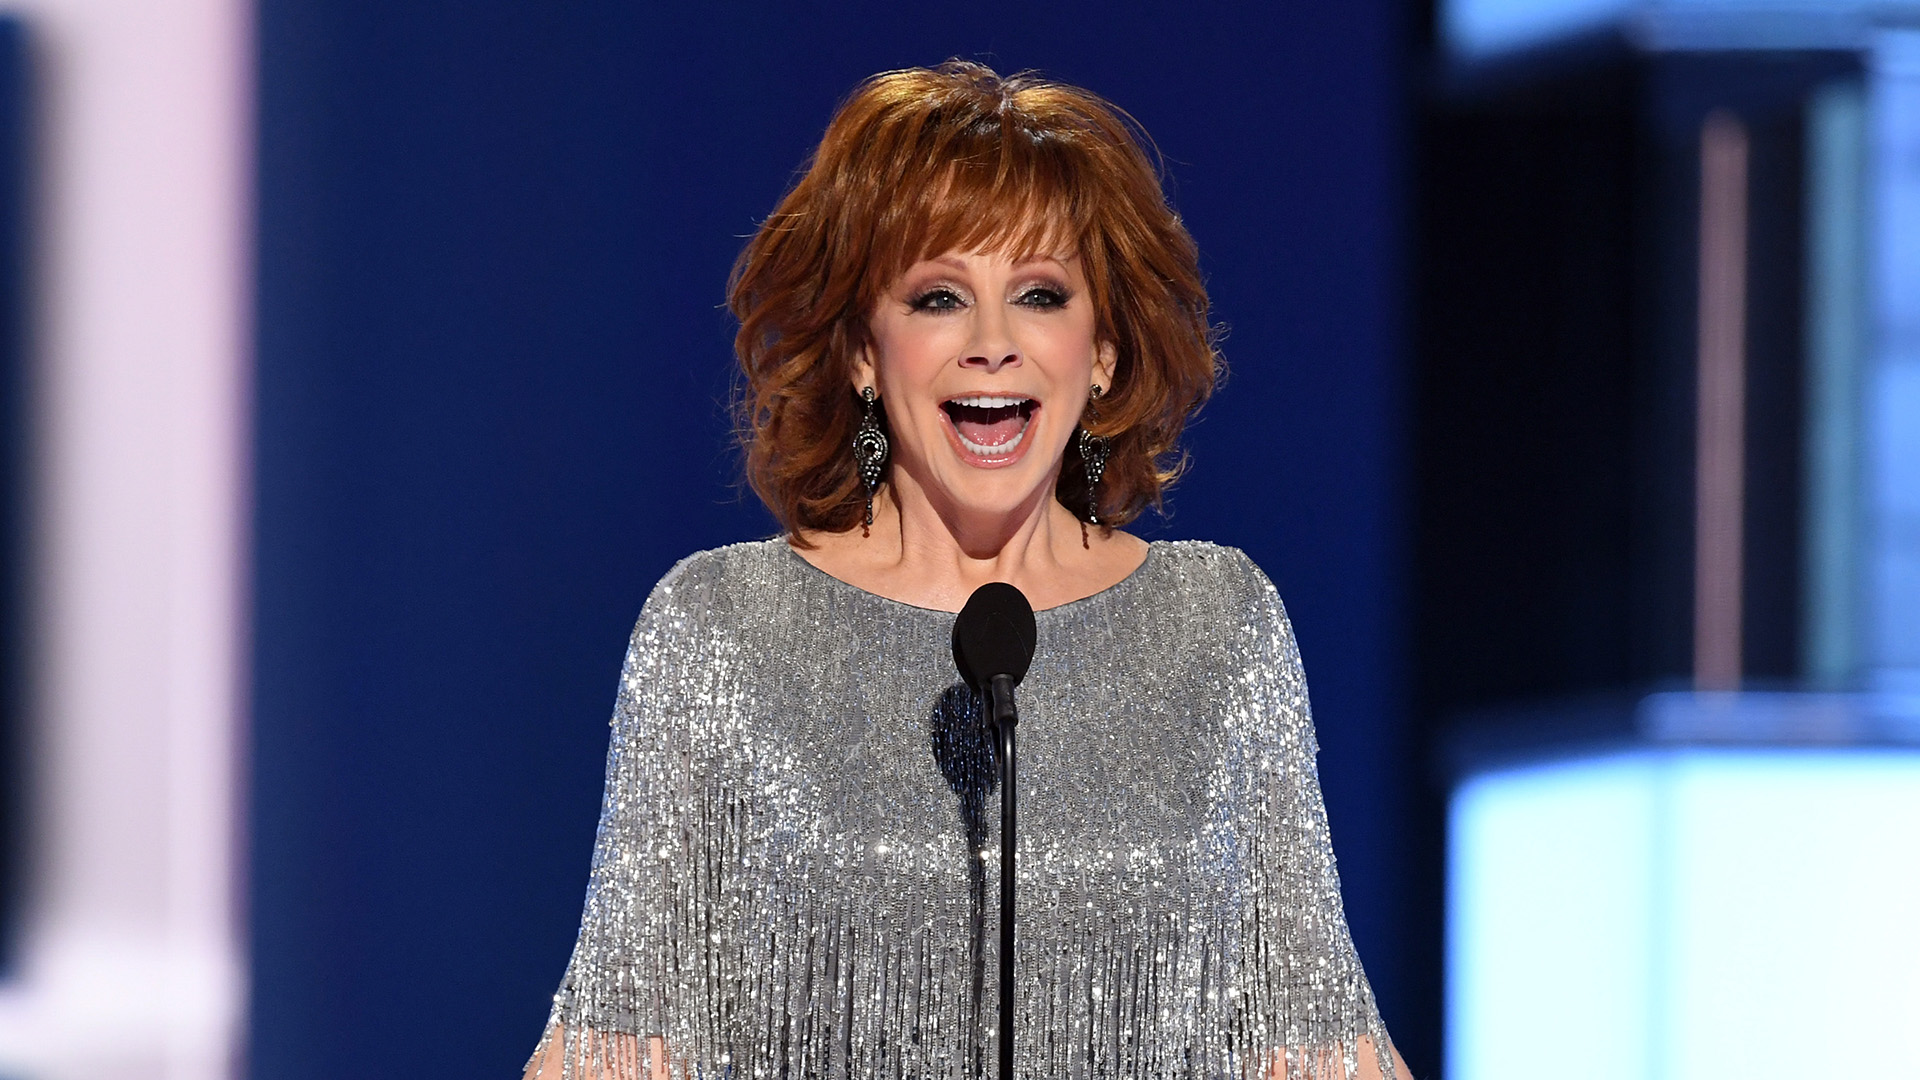 Host Reba McEntire speaks onstage during the 54th Academy Of Country Music Awards at MGM Grand Garden Arena on April 07, 2019 in Las Vegas, Nevada.